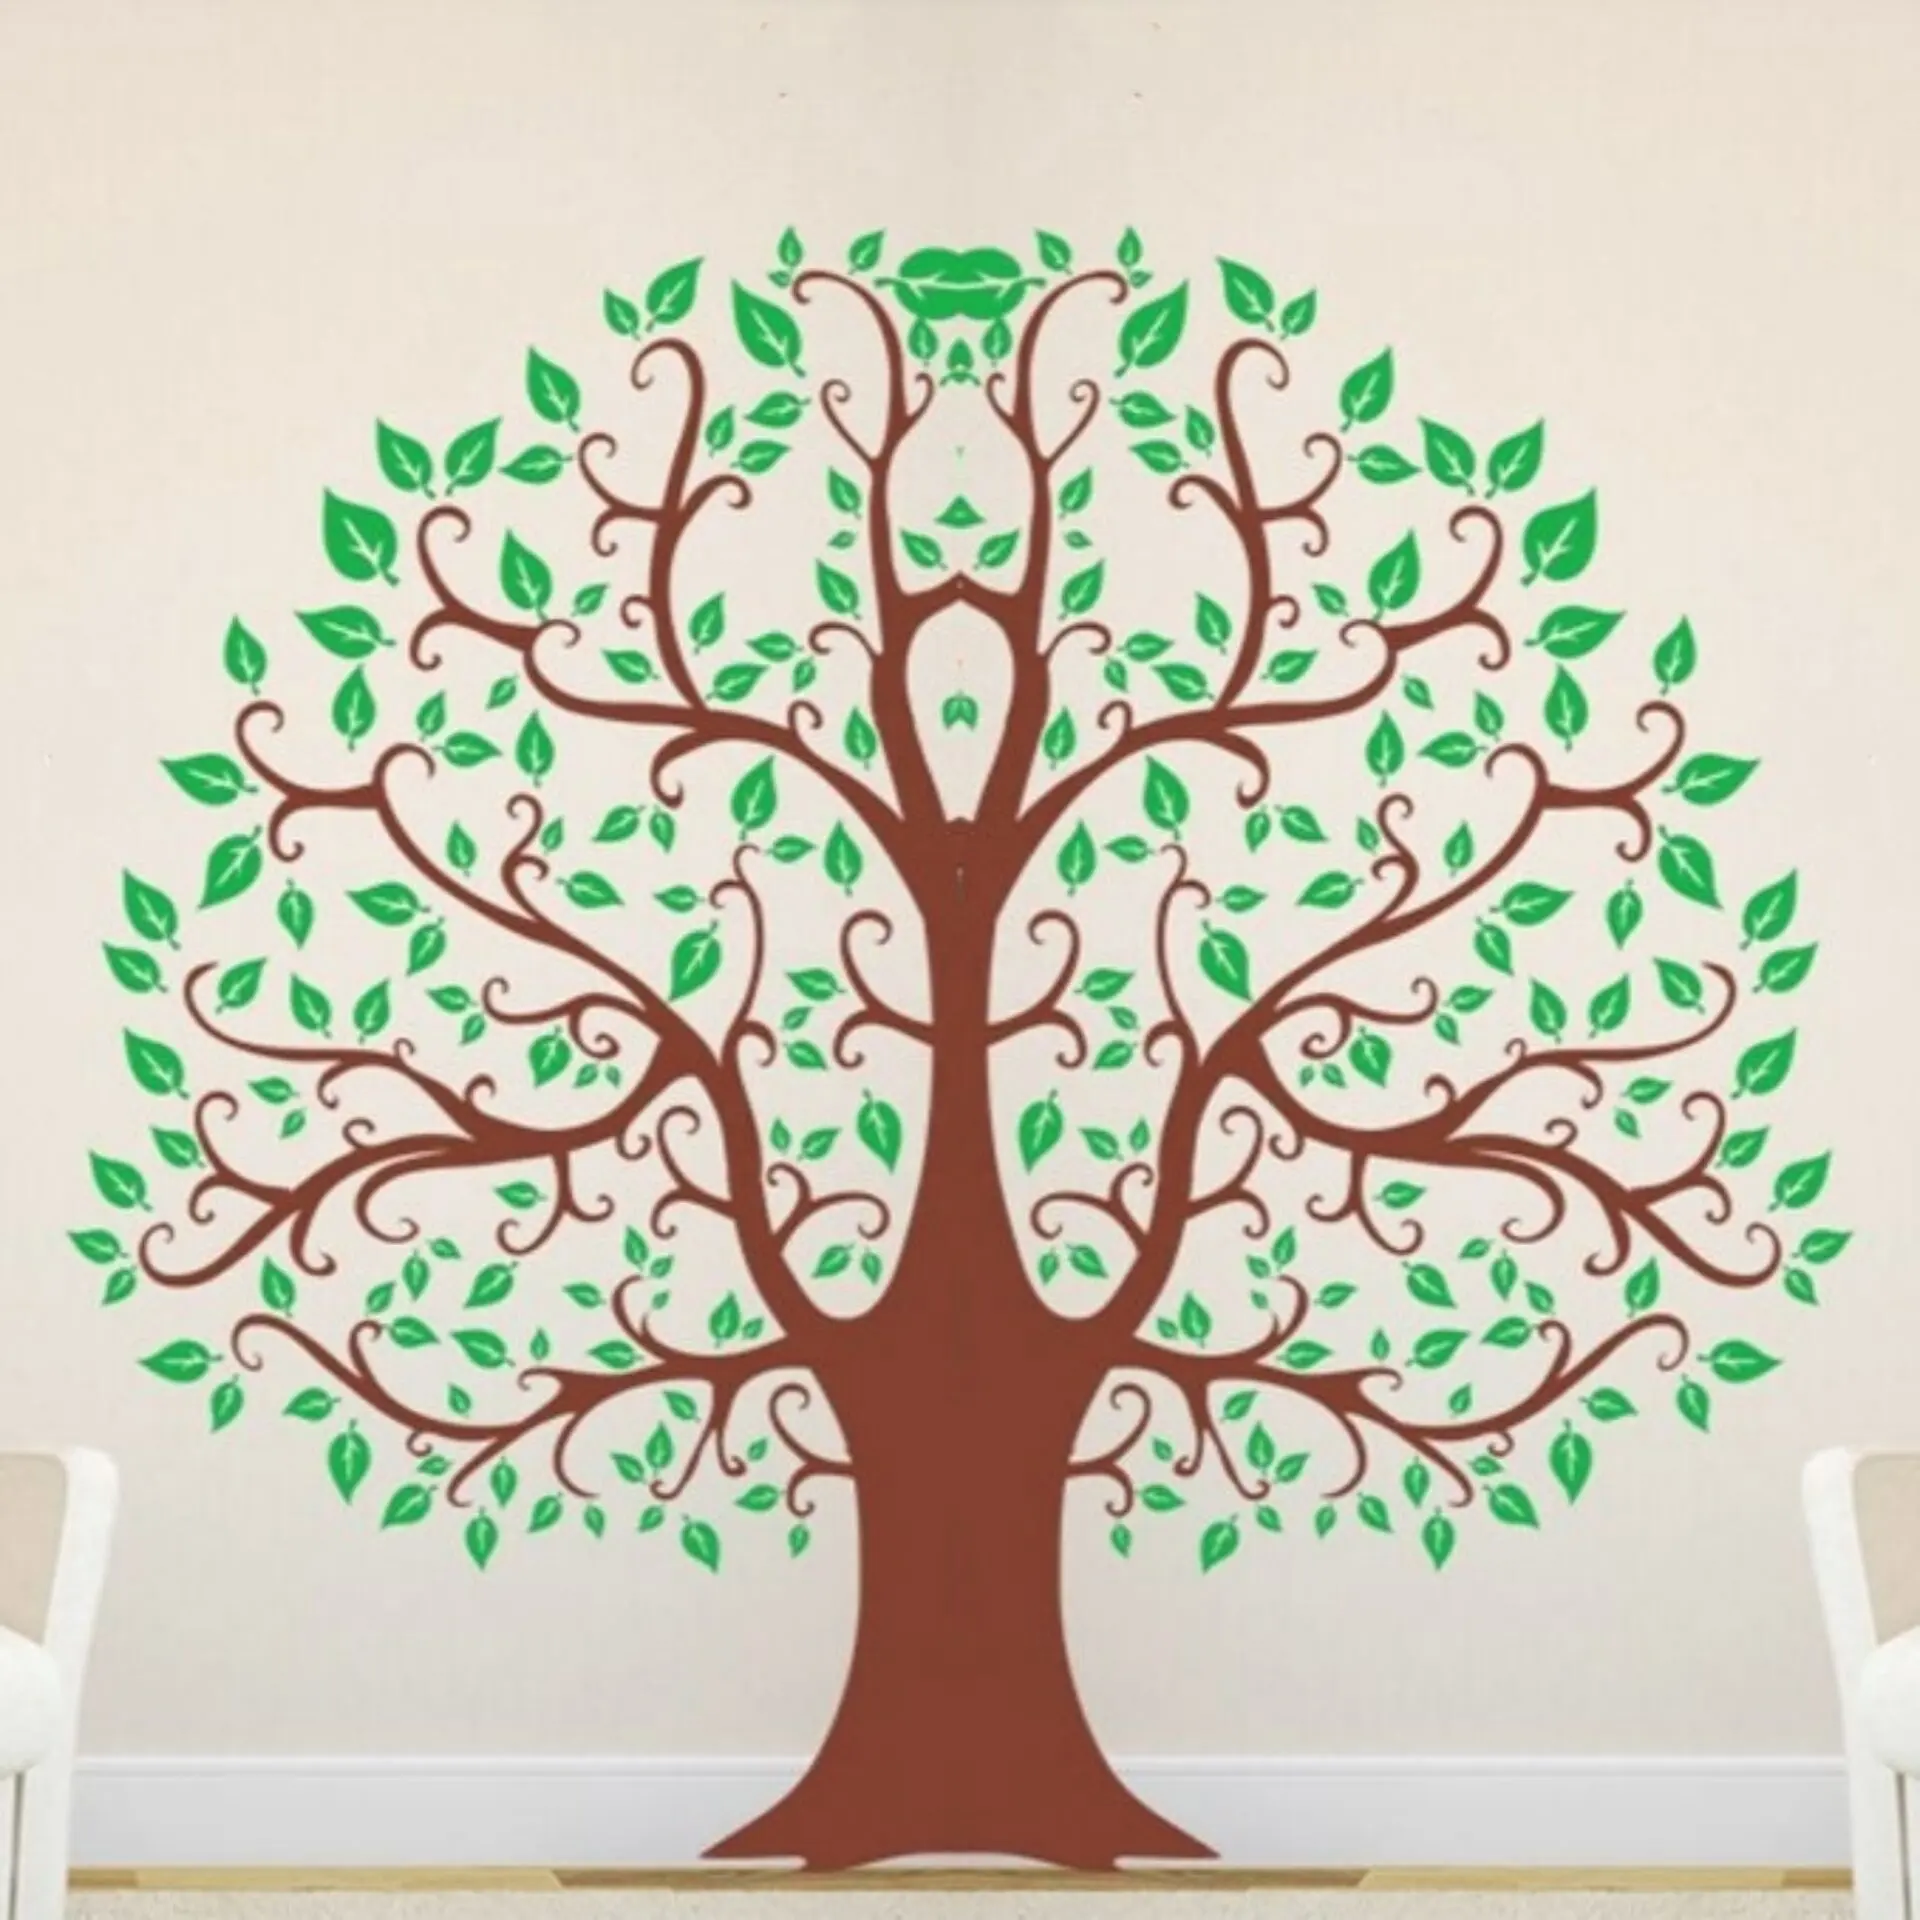 Reusable and removable green tree 3d wall stickers decor for baby room